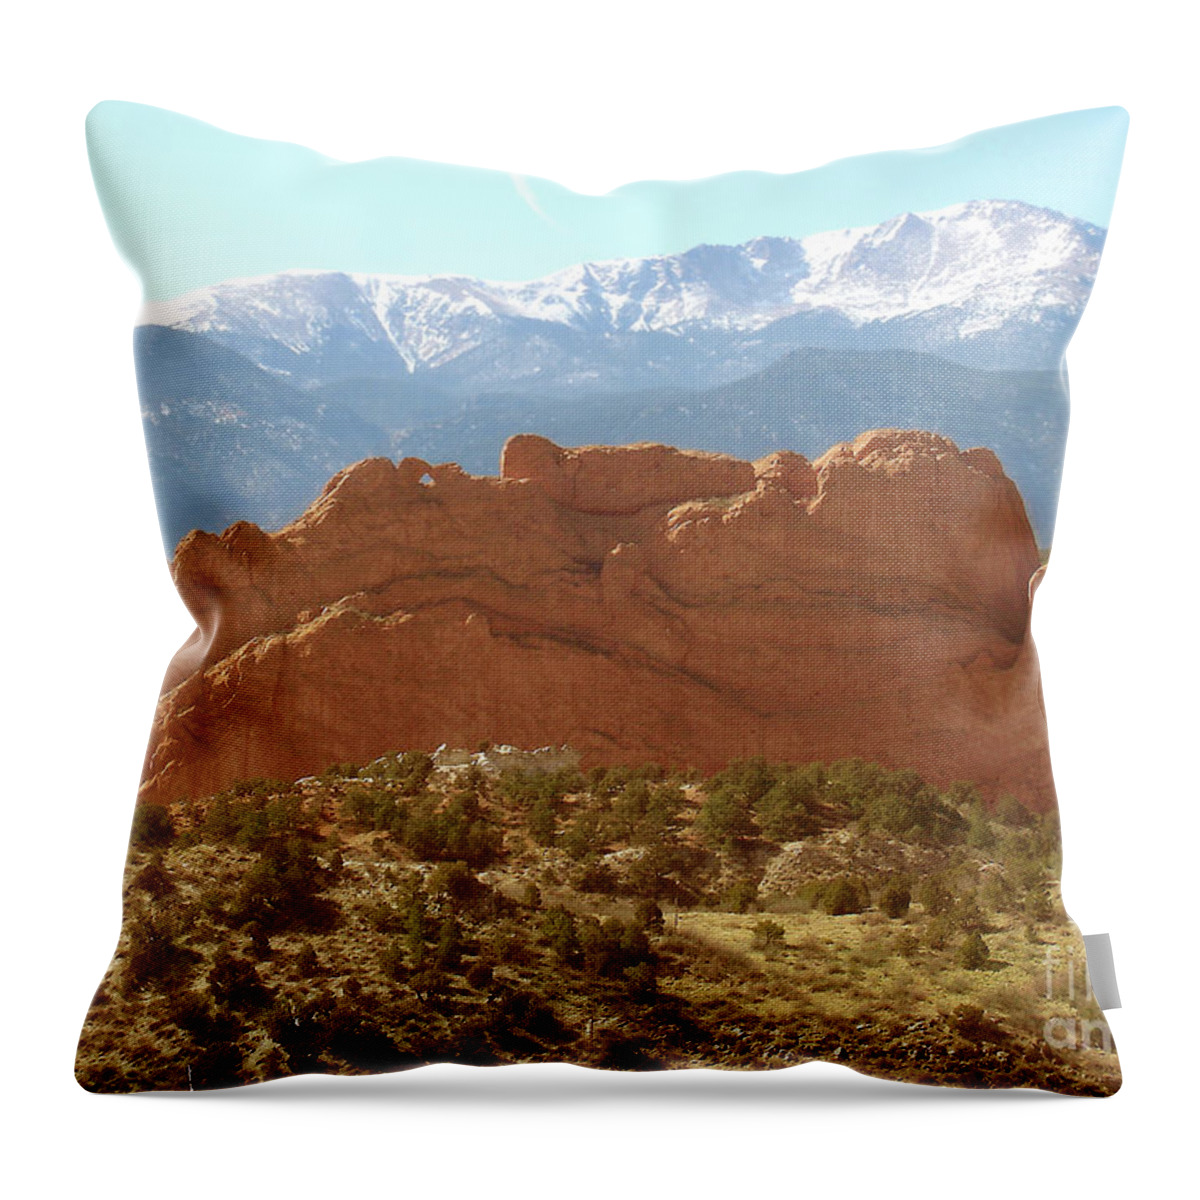 America The Beautiful Throw Pillow featuring the photograph America the Beautiful by Cristophers Dream Artistry